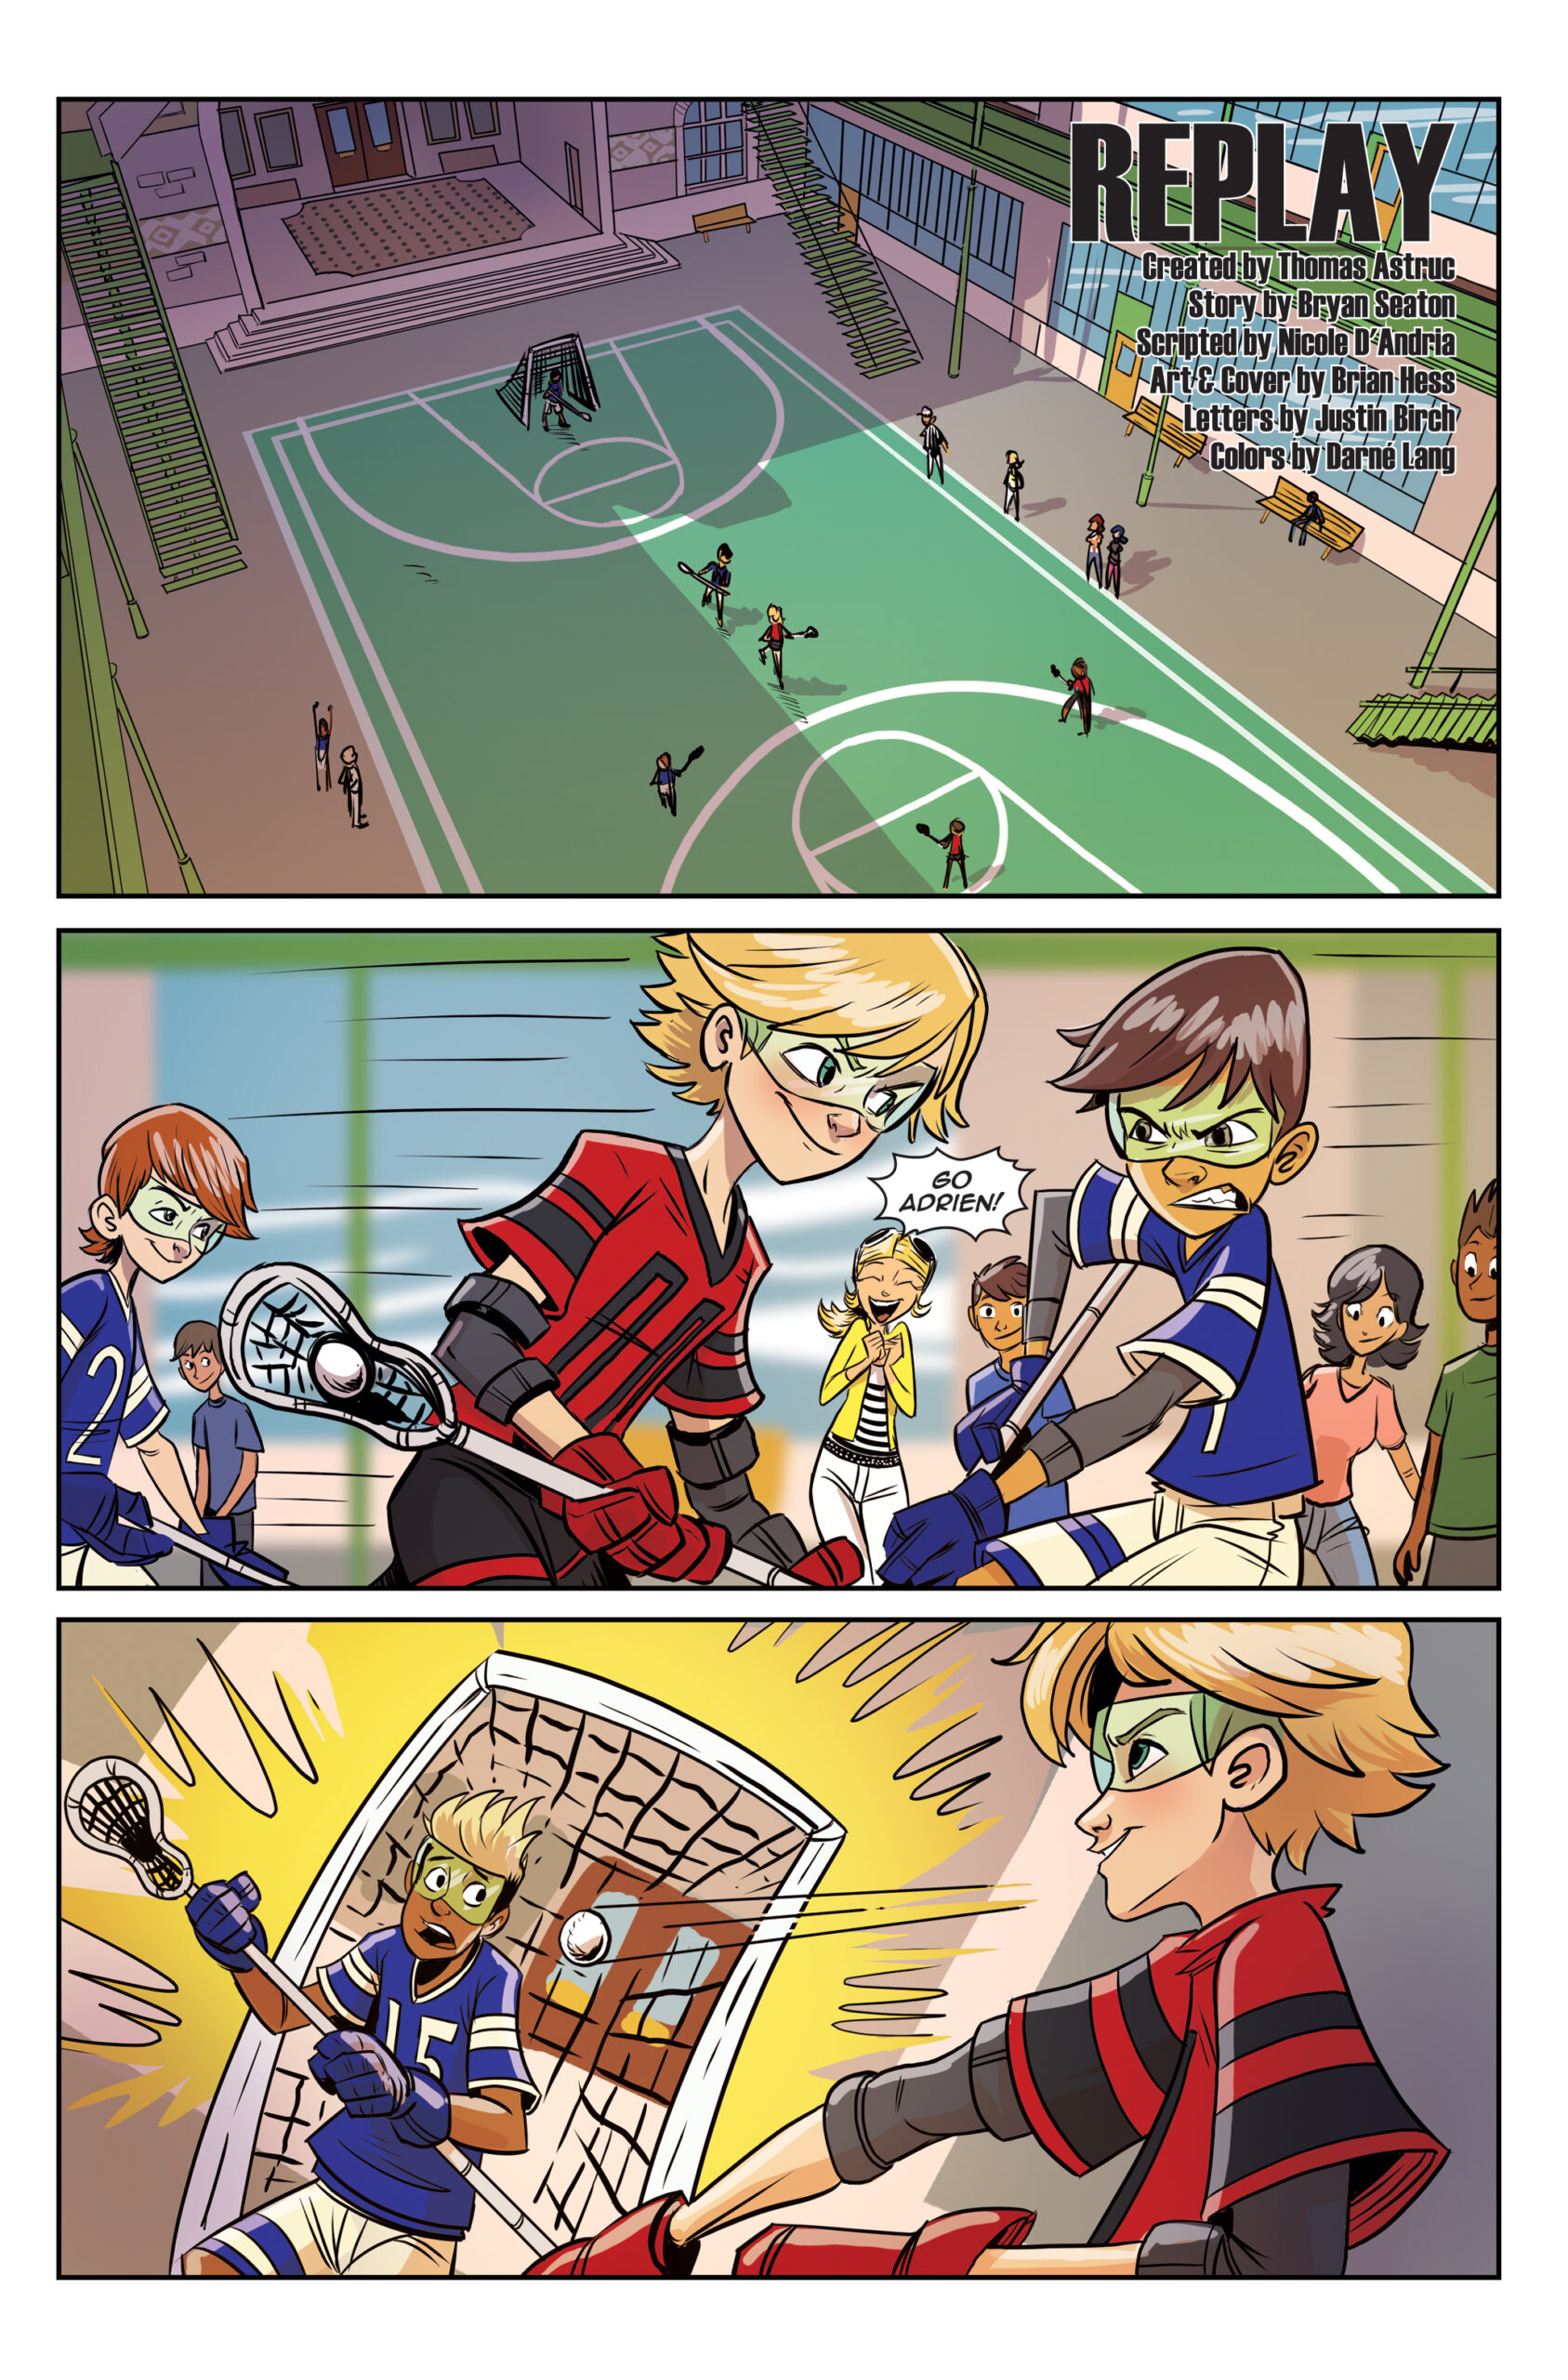 MIRACULOUS ADVENTURES:New Stories Based on the Popular TV Show! – First